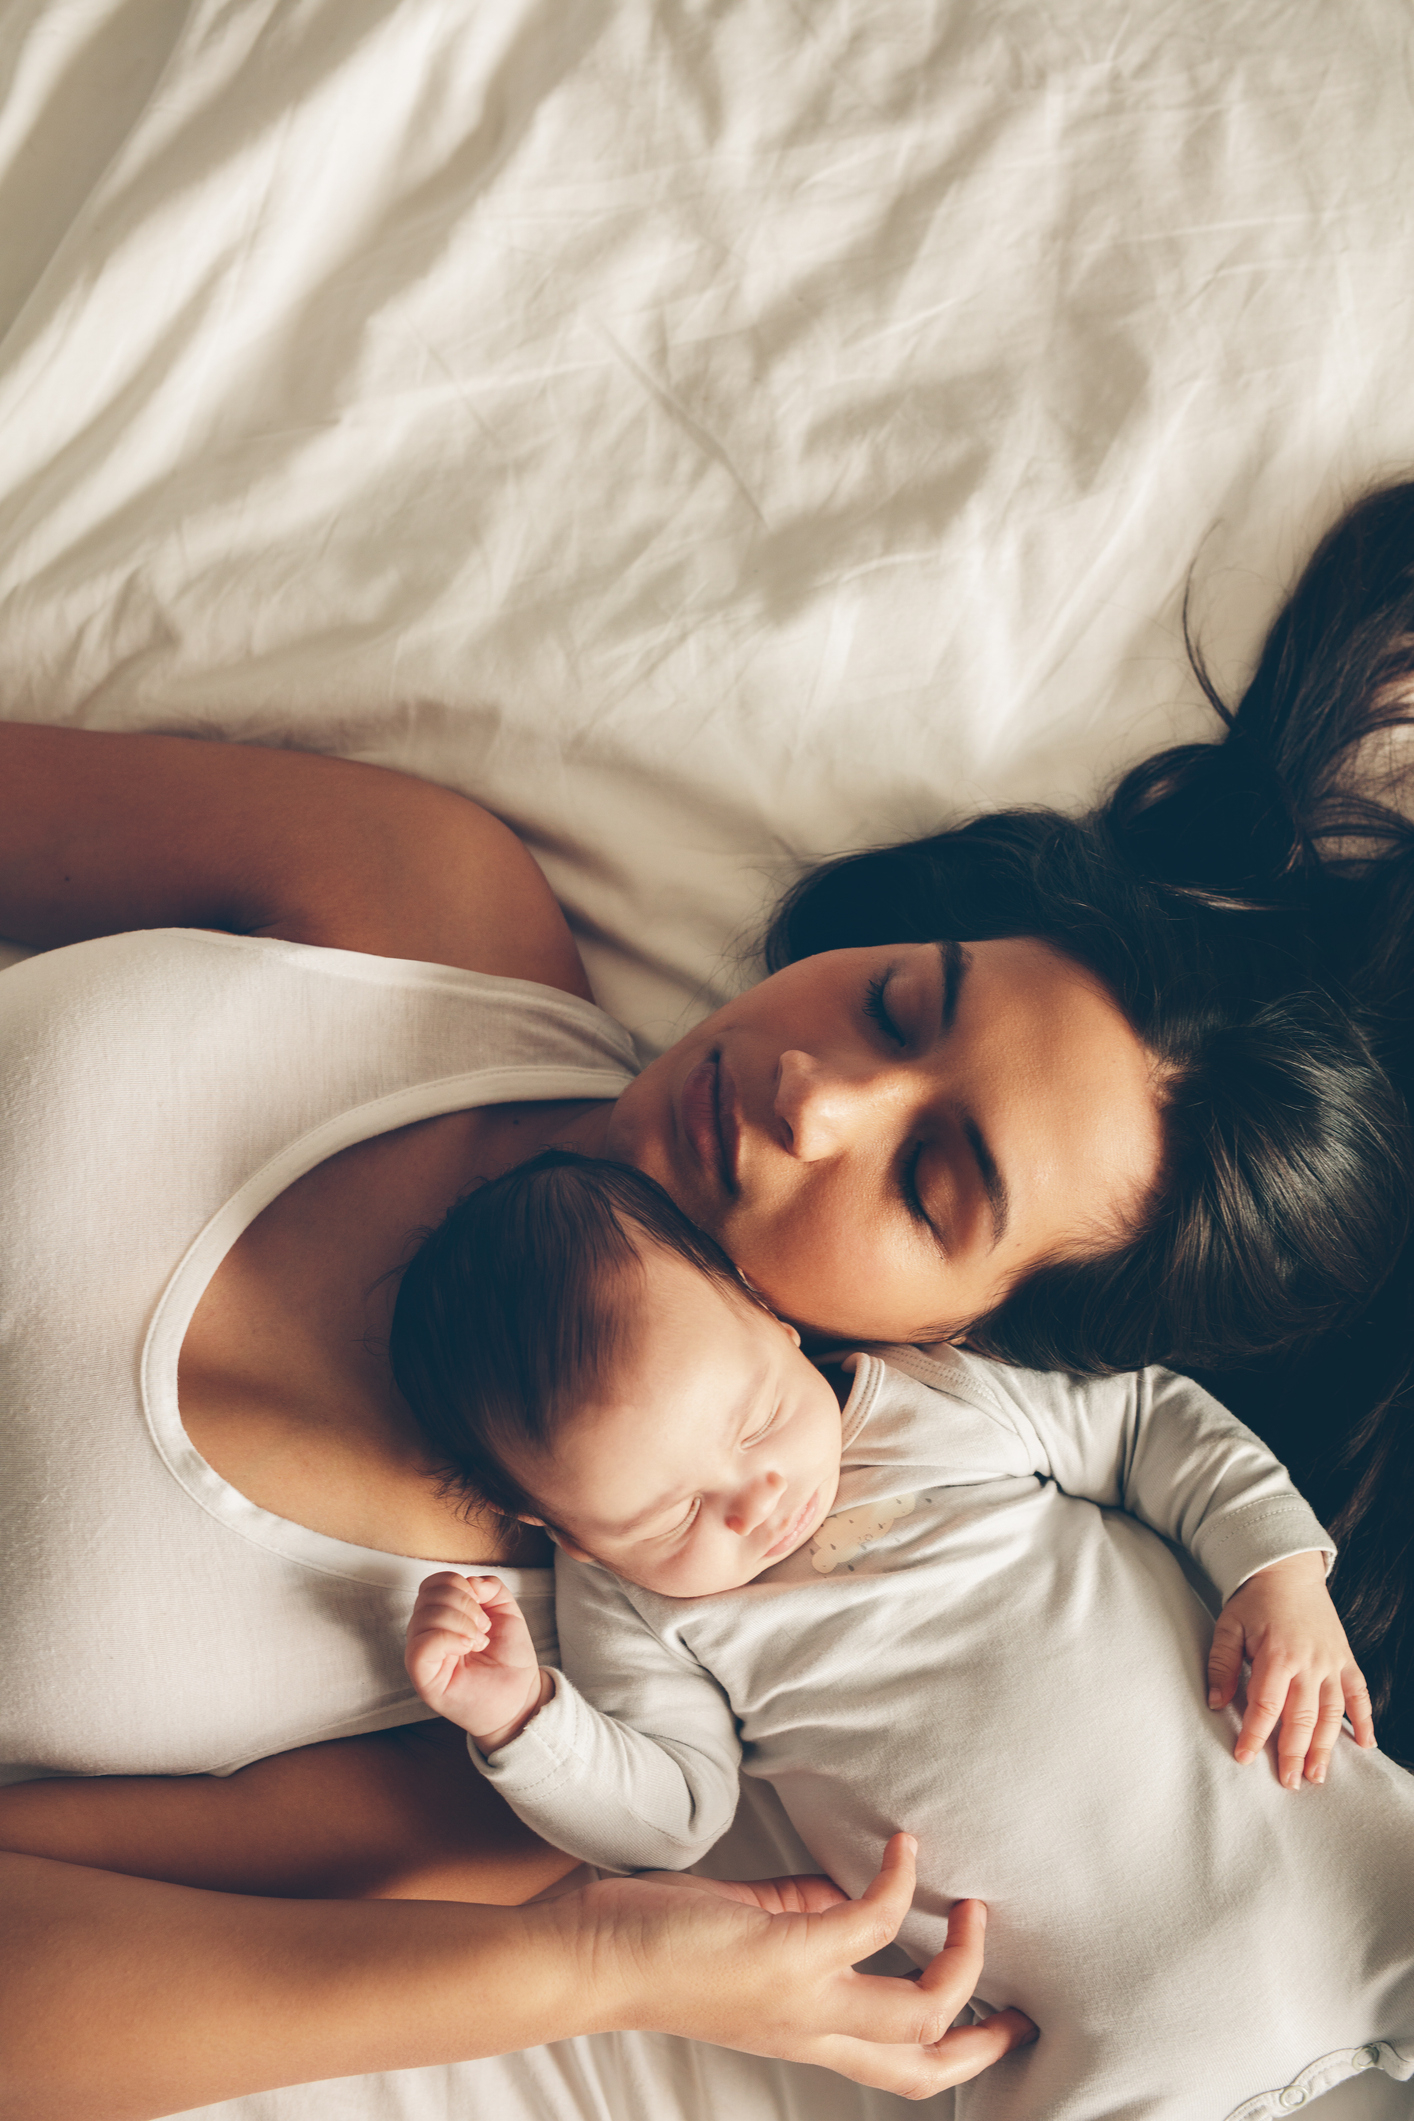 Woman lying down holding a sleeping baby. Both are relaxed and appear to be napping